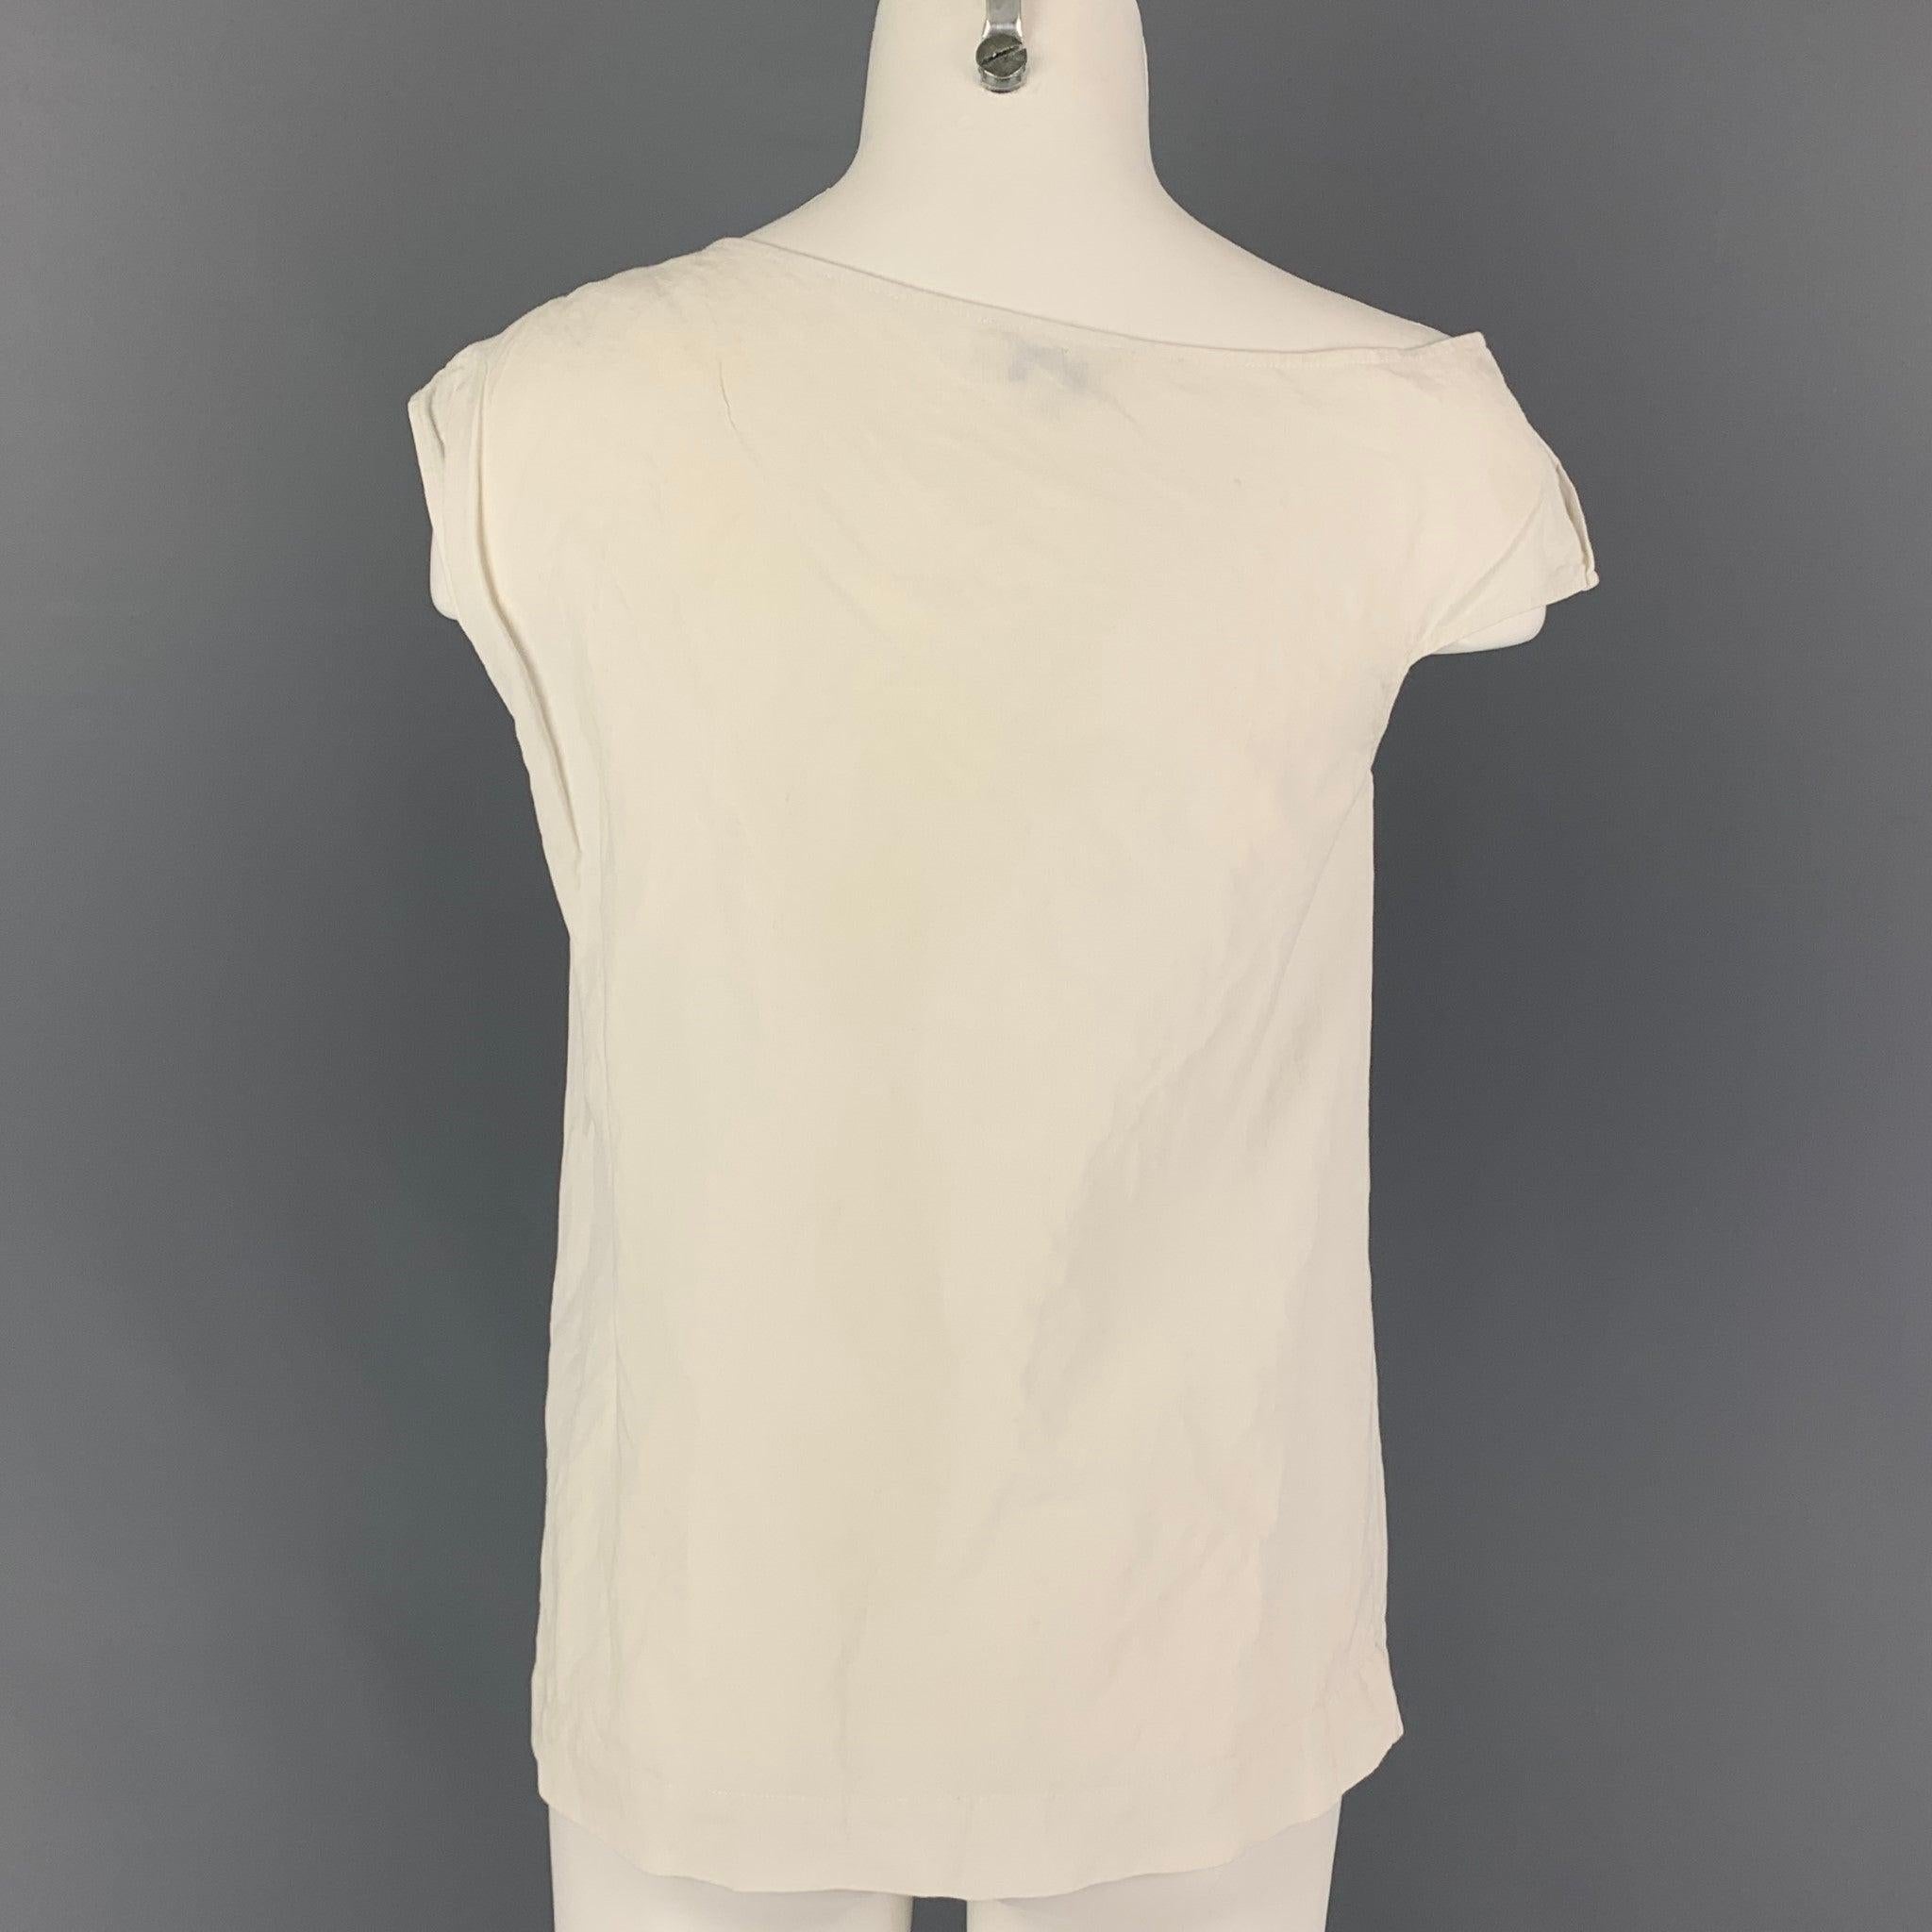 ISA ARFEN Size 6 Cream Cotton Blend Wrinkled A-Line Blouse In Good Condition For Sale In San Francisco, CA